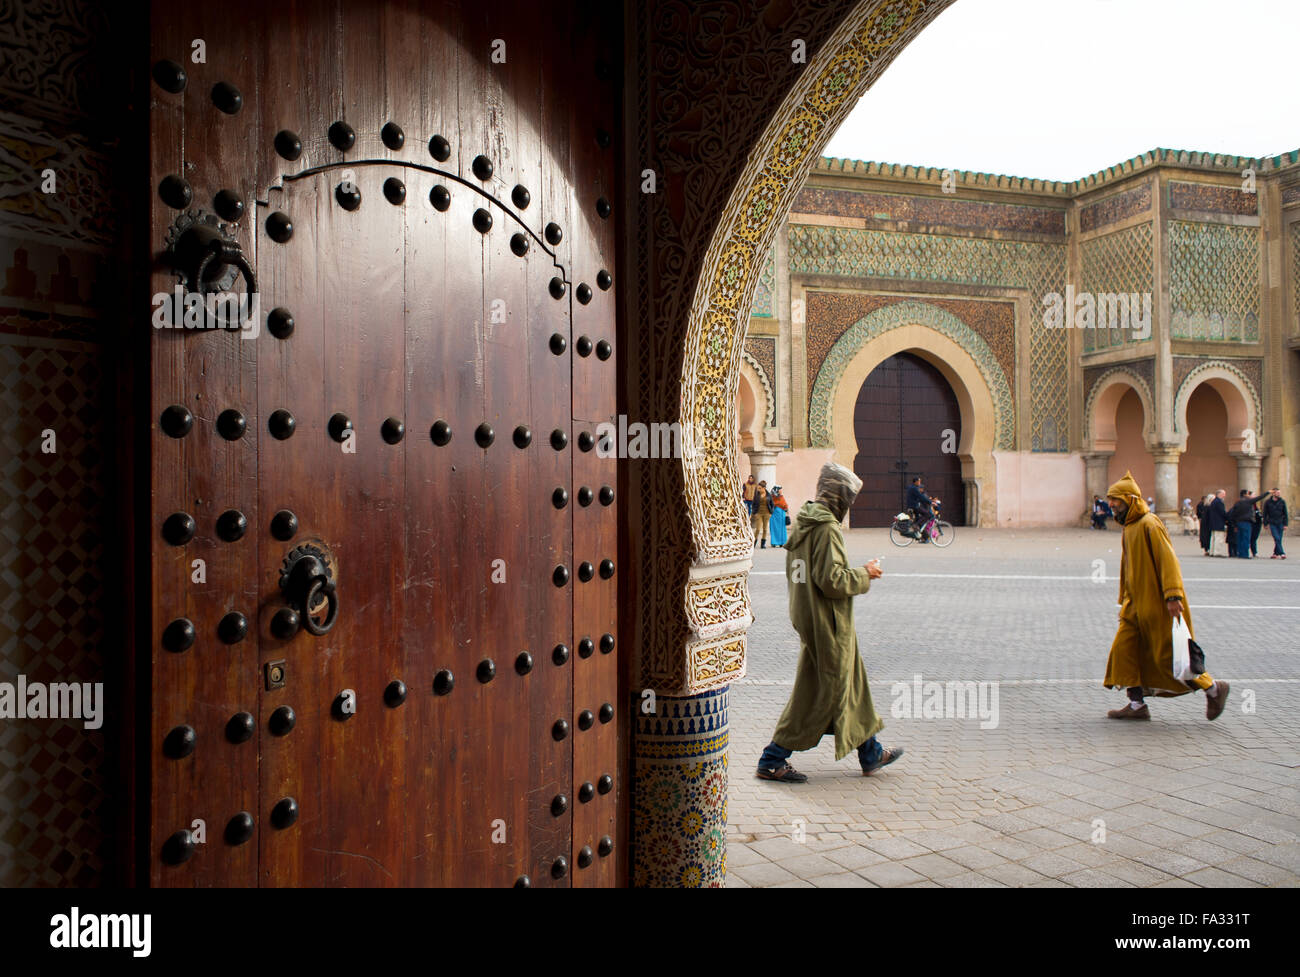 People with djellaba walking in front of The Bab el Mansour gate, view from inside a entry hall of a classical building. Meknes. Stock Photo